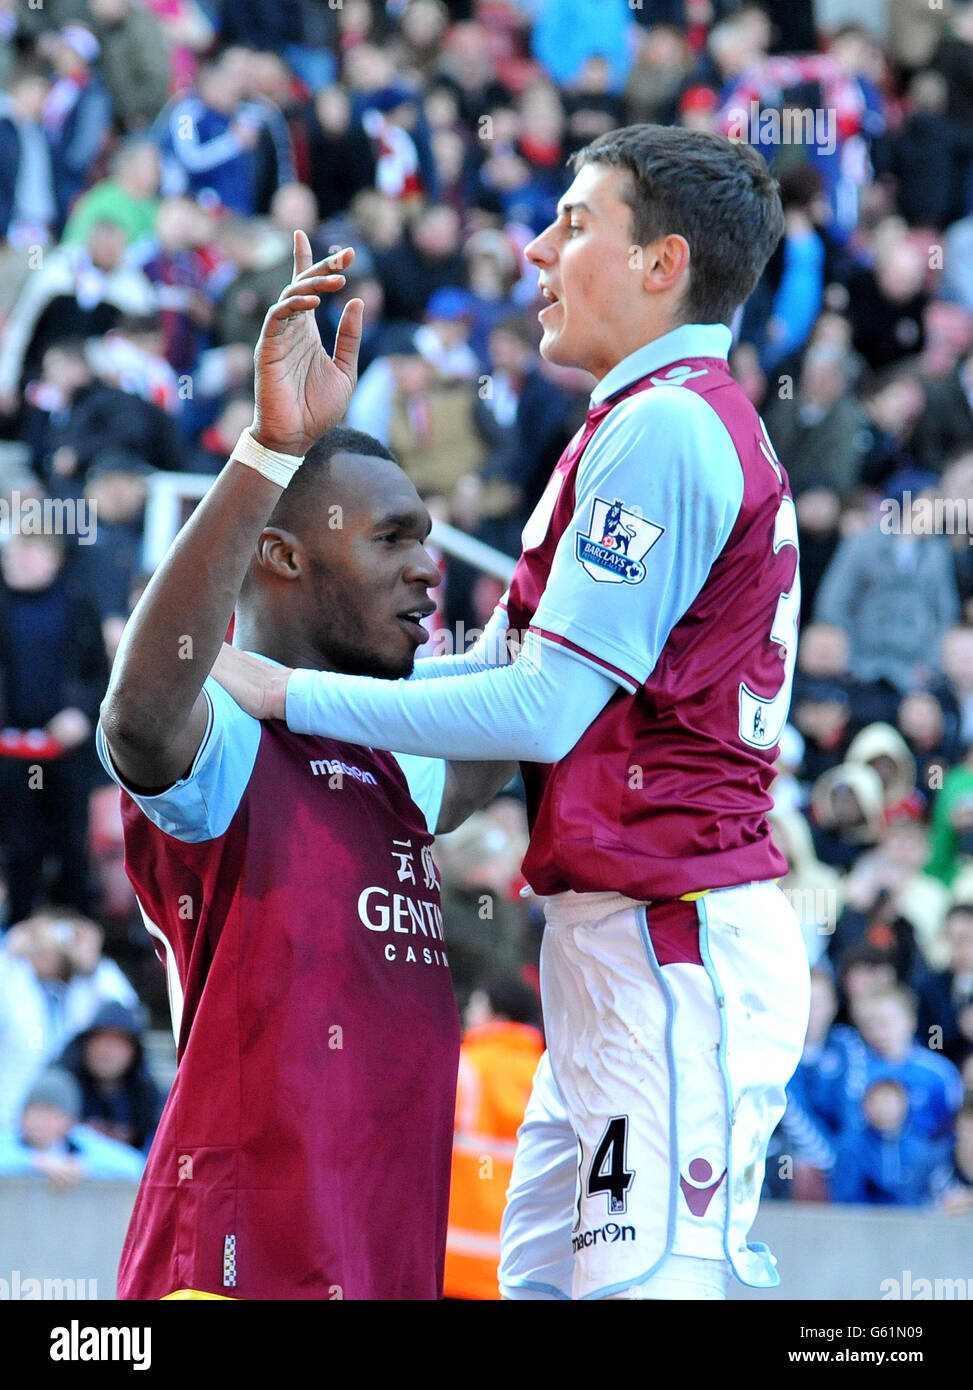 Aston Villa's Christian Benteke (left) is congratulated by Mattew Lowton after scoring their third goal during the Barclays Premier League match at the Britannia Stadium, Stoke on Trent. Stock Photo